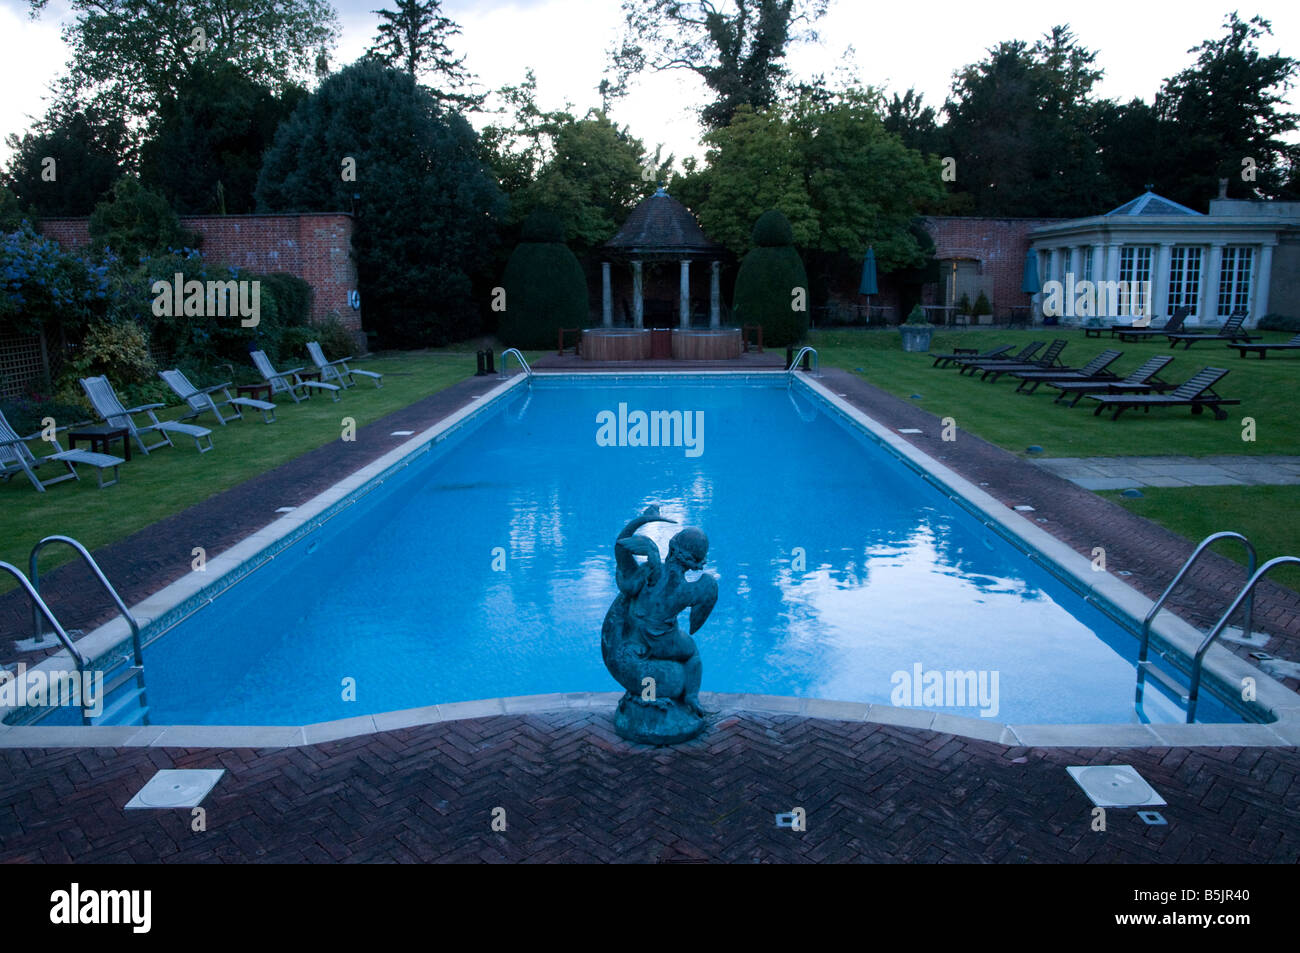 The swimming pool at Cliveden House where the Profumo affair took place, England UK Stock Photo